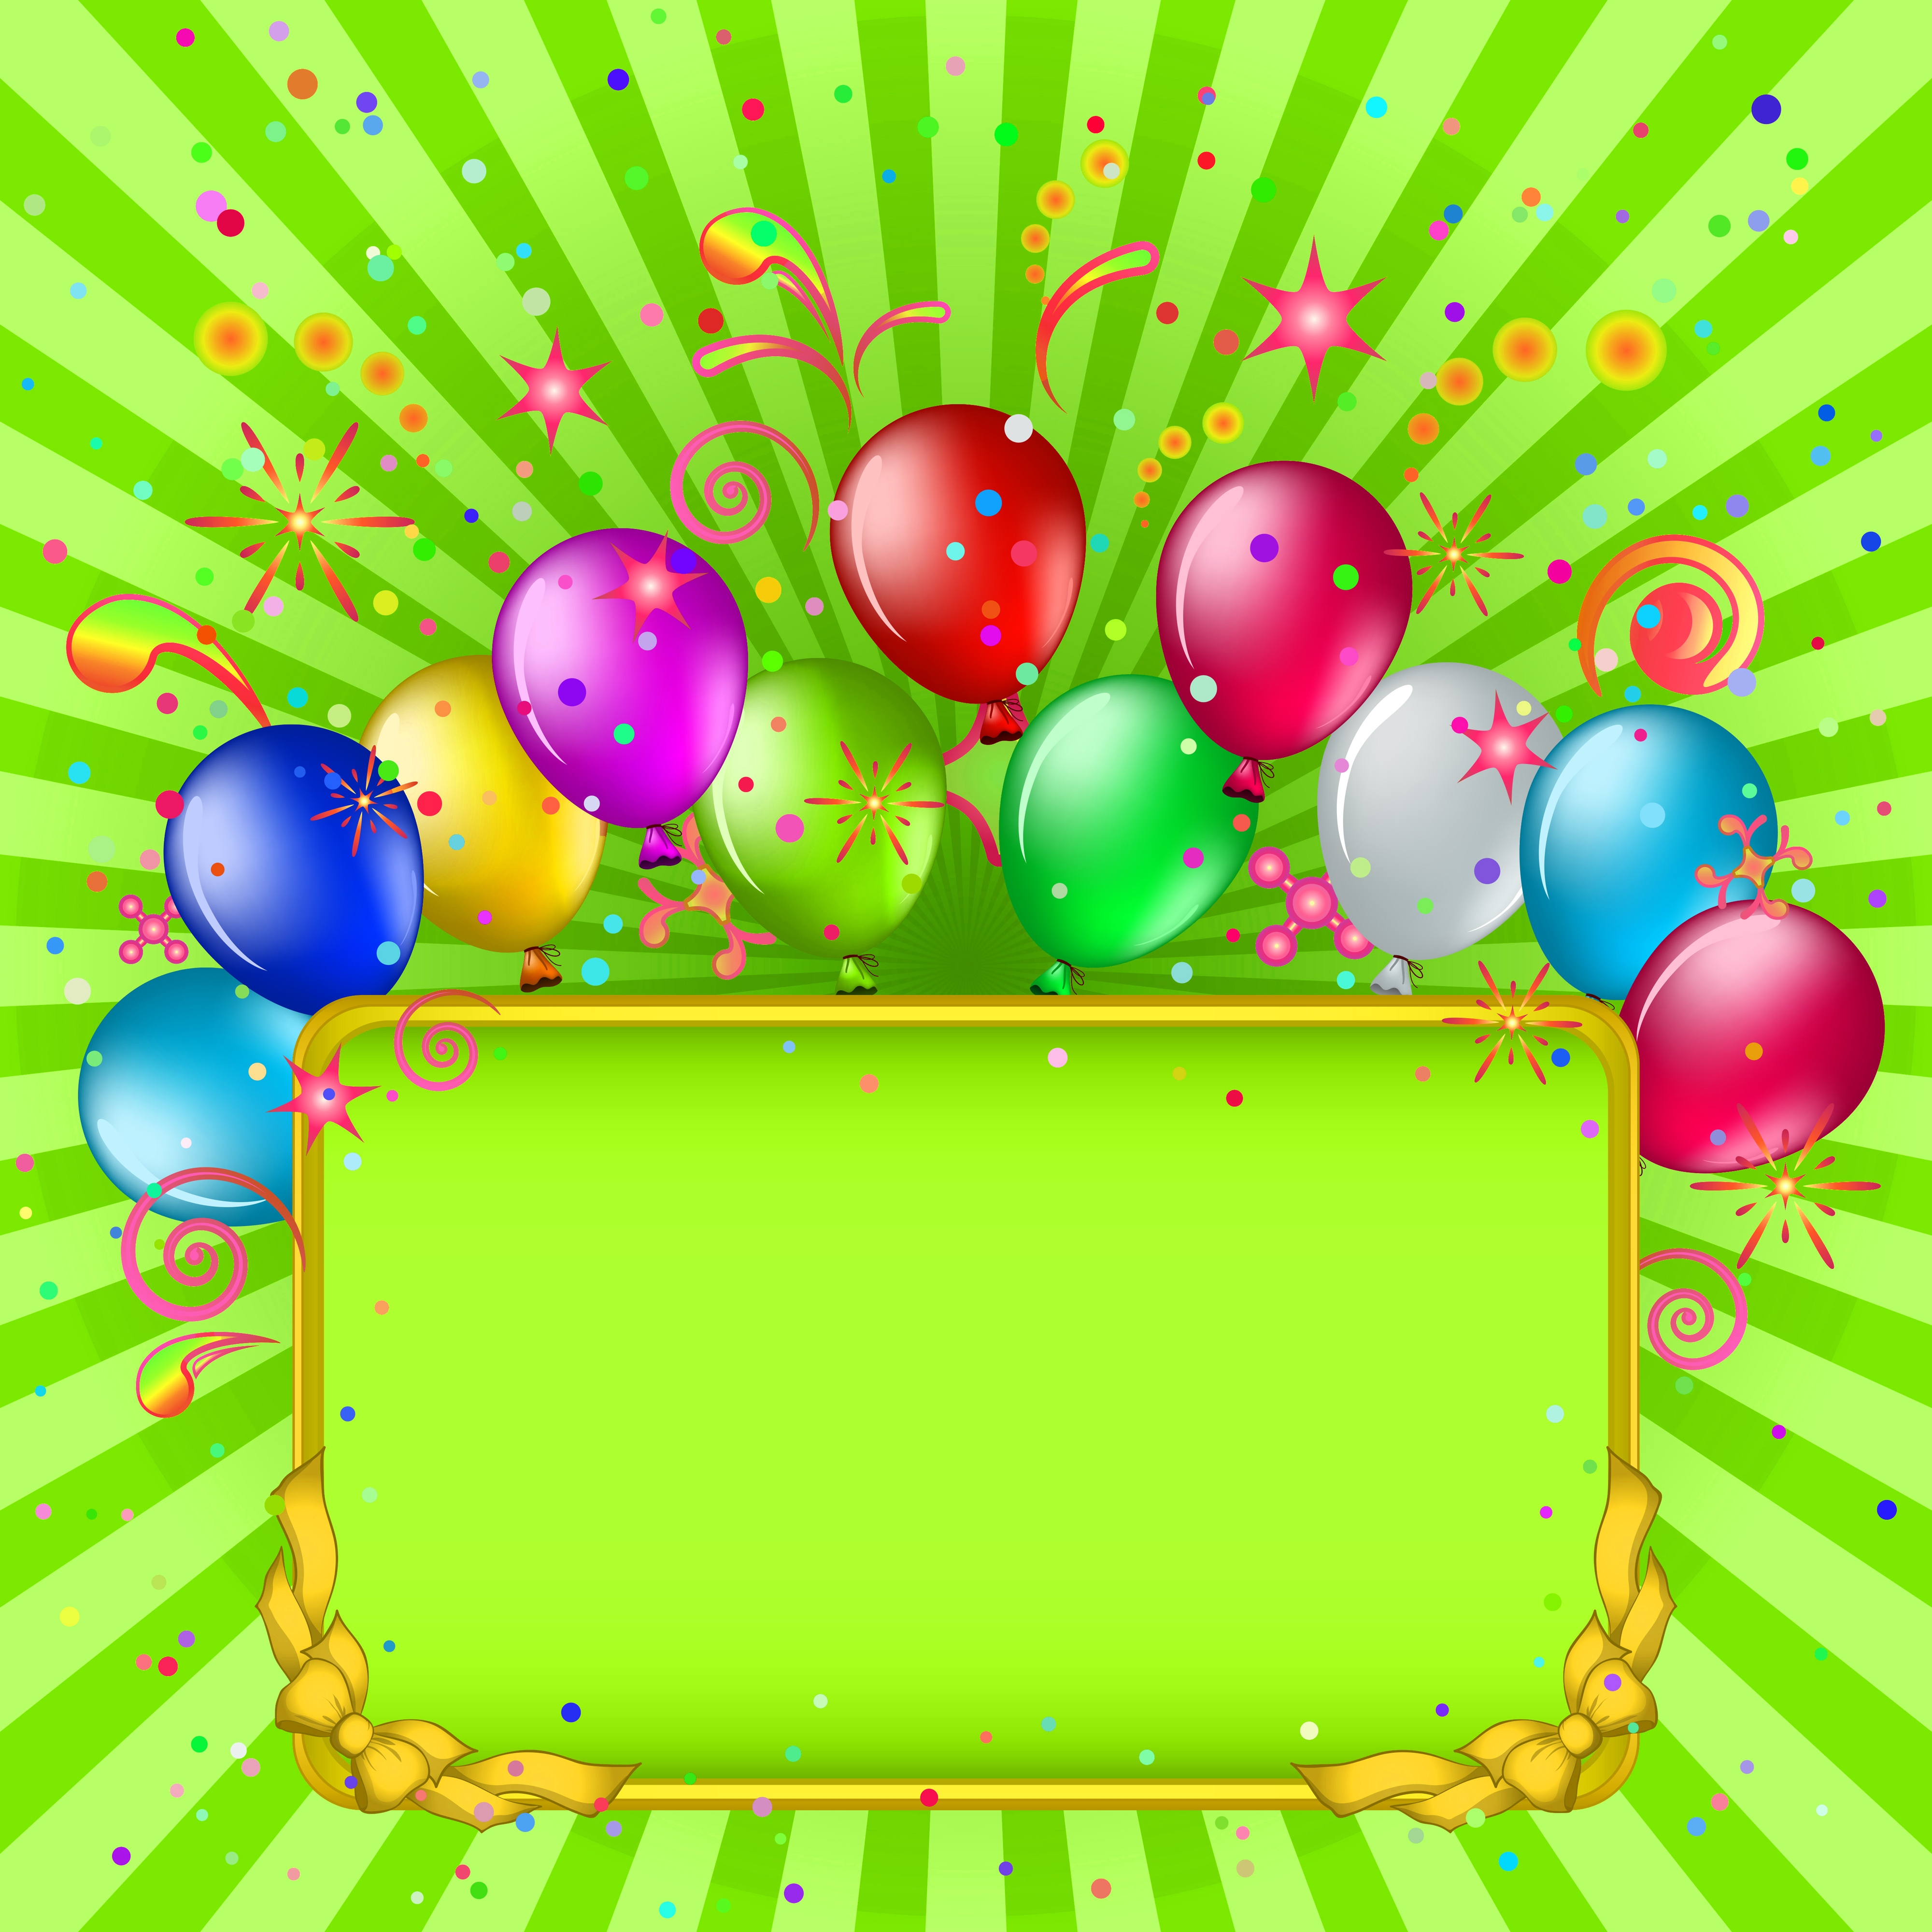 Green Birthday Background with Balloons.